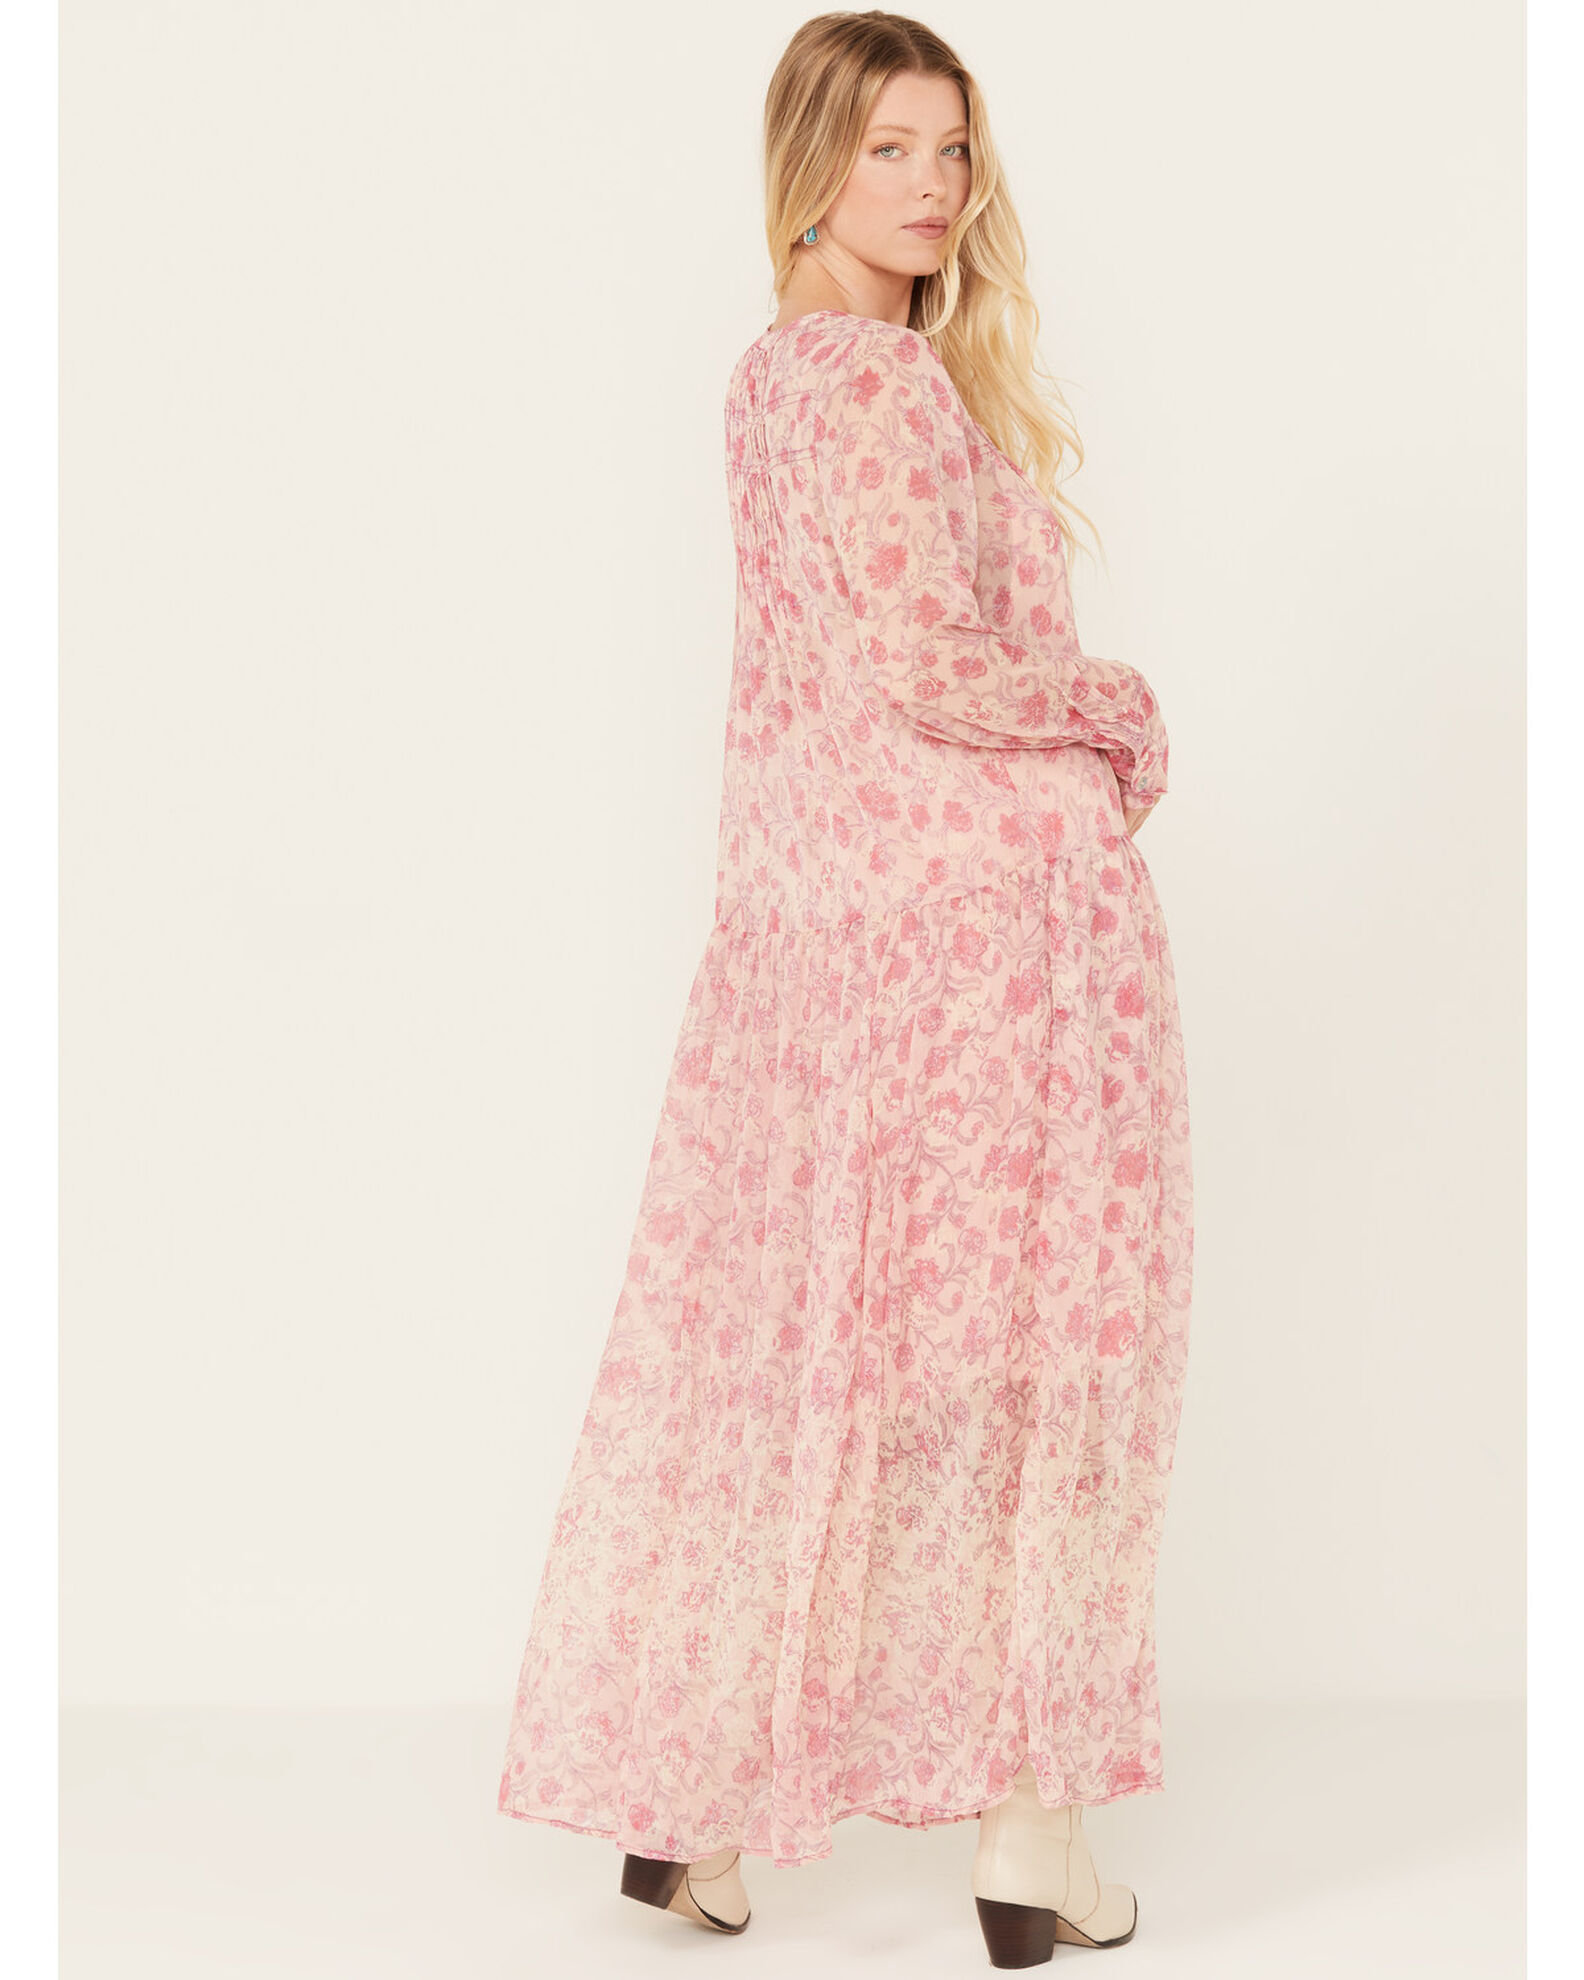 Free People Women's See It Through Floral Long Sleeve Maxi Dress